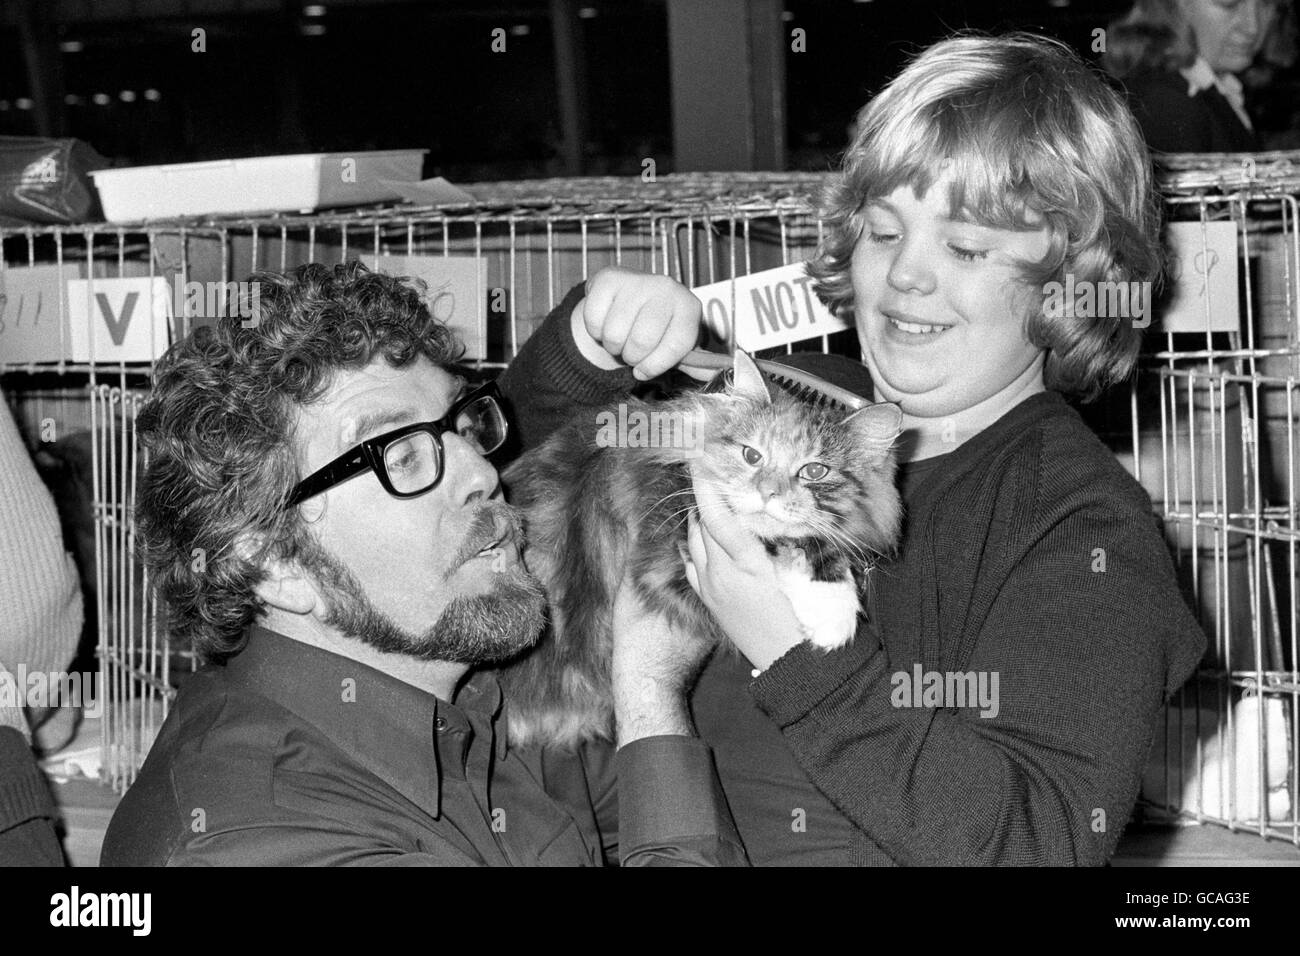 At Olympia today for the National Cat Club Show, Australian entertainer Rolf Harris and his 11 year old daughter Bindi, groom their long-haired tortoise-shell cat 'Fluffybritches' who is entered in the Household Pets Section. Stock Photo